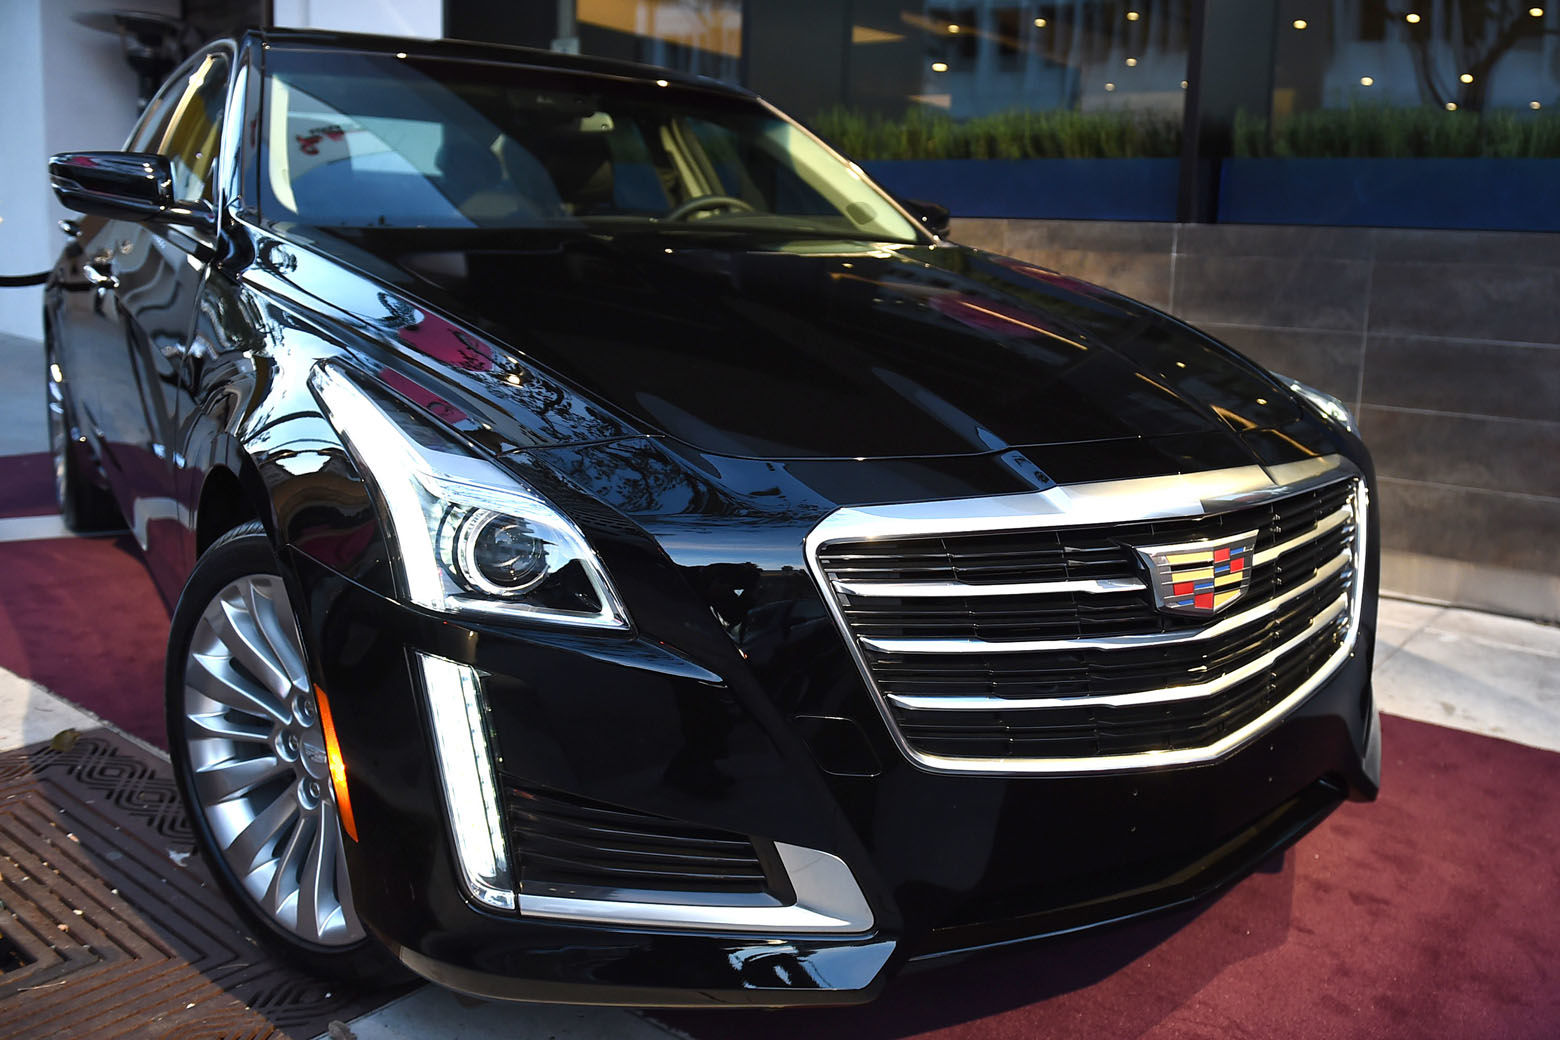 The 2015 Cadillac CTS on display at The Hollywood Reporter Nominees Night presented by Cadillac, with Delta, Roberto Coin, and Neiman Marcus Beverly Hills at Spago on Mon. Feb. 2, 2015, in Beverly Hills, Calif. (Photo by Jordan Strauss/Invision for The Hollywood Reporter/AP Images)